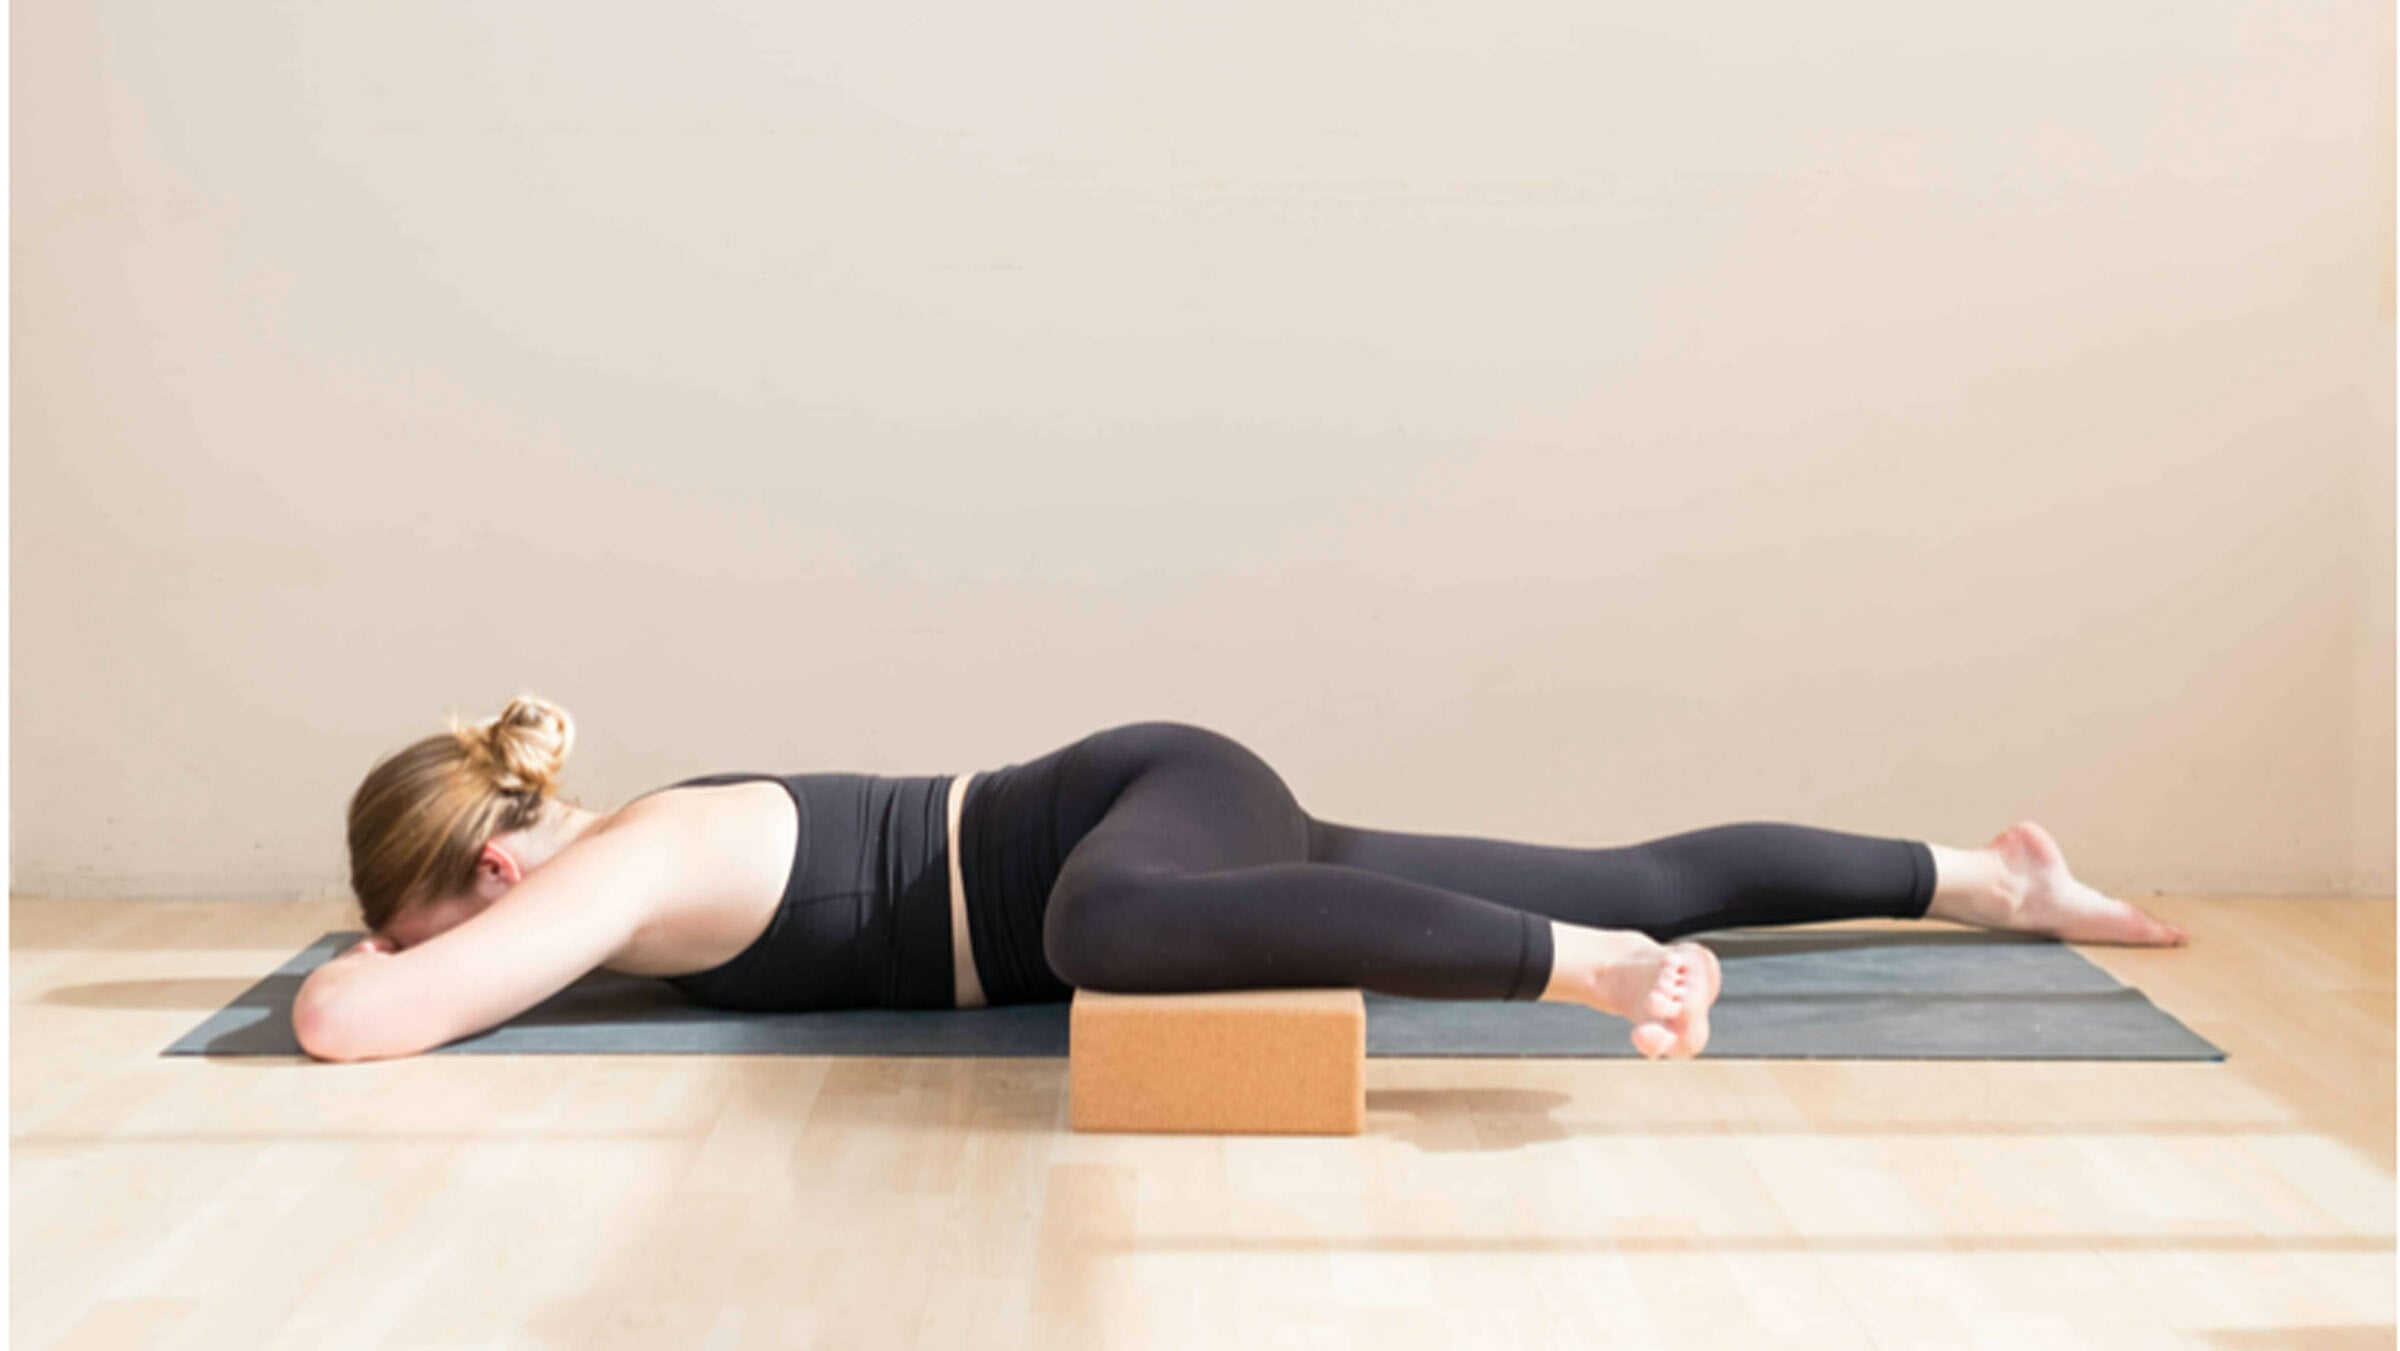 Tuloo Yoga Block High-Density EVA Foam Block to Support and Deepen Poses  Yoga Blocks Price in India - Buy Tuloo Yoga Block High-Density EVA Foam  Block to Support and Deepen Poses Yoga